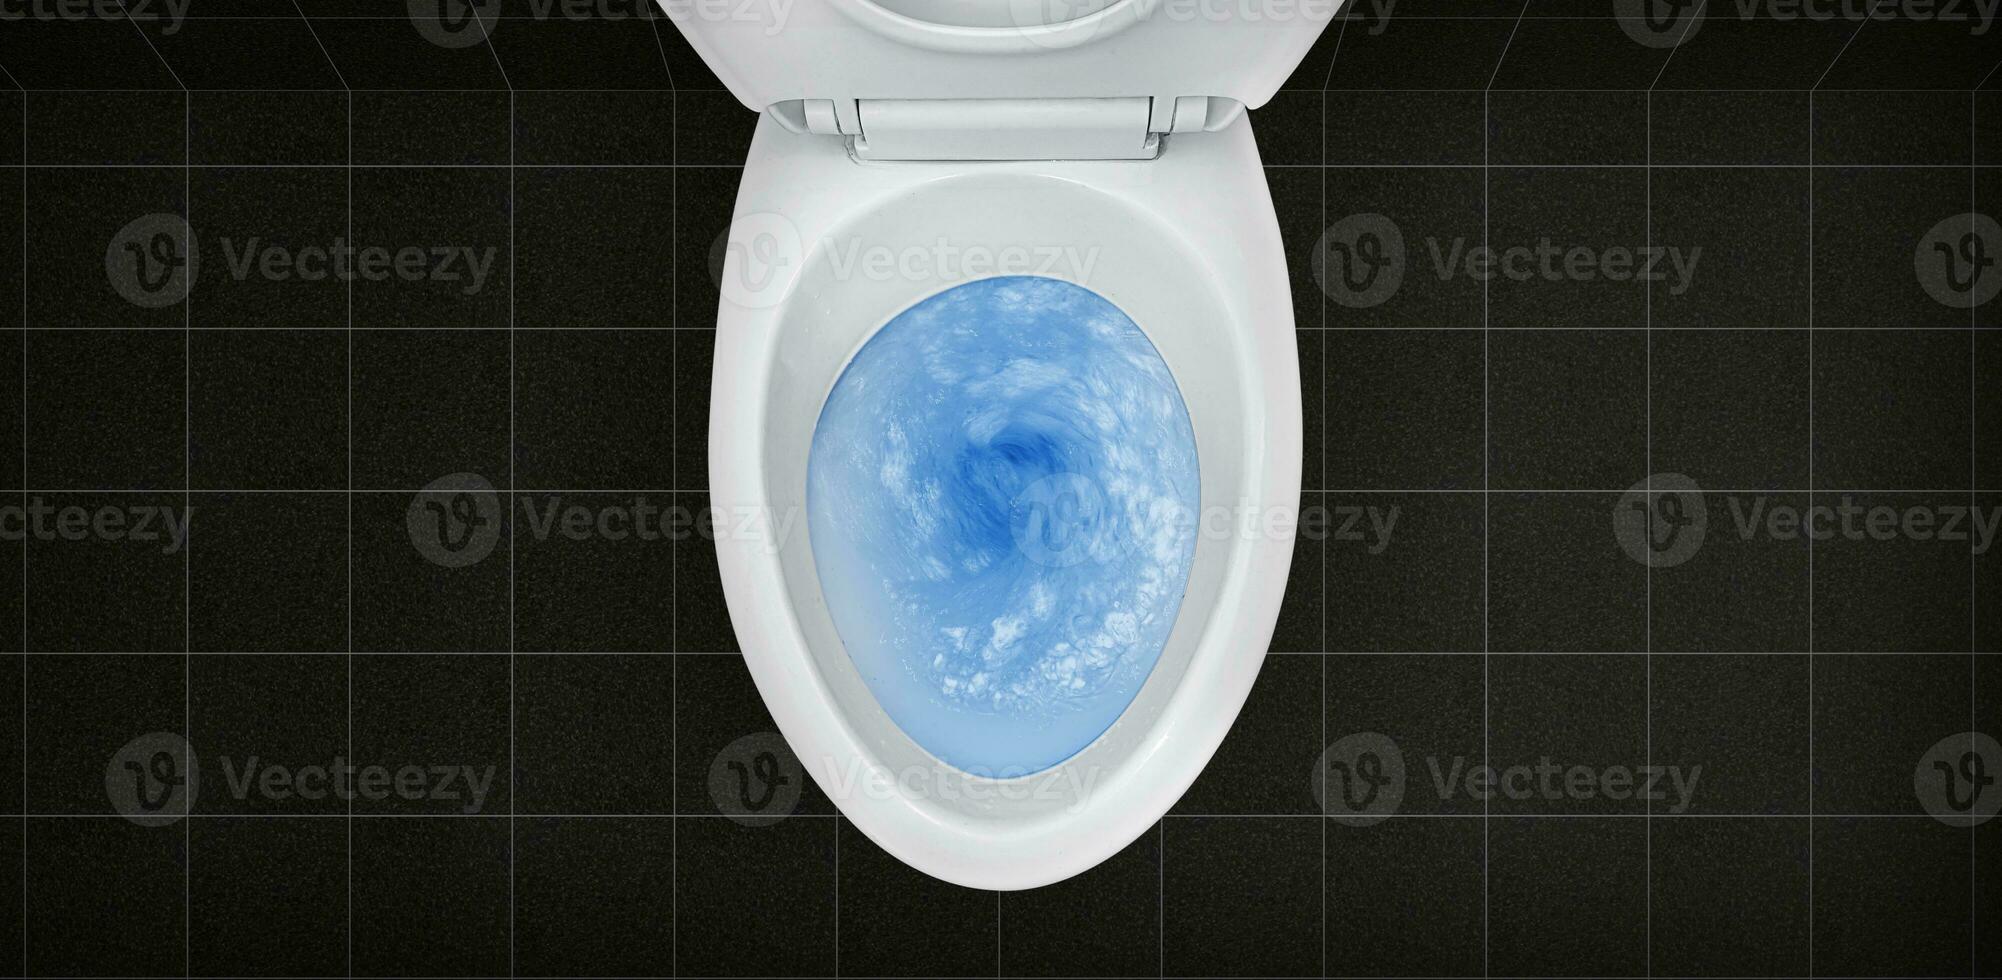 Top view of toilet bowl, blue detergent flushing in it photo